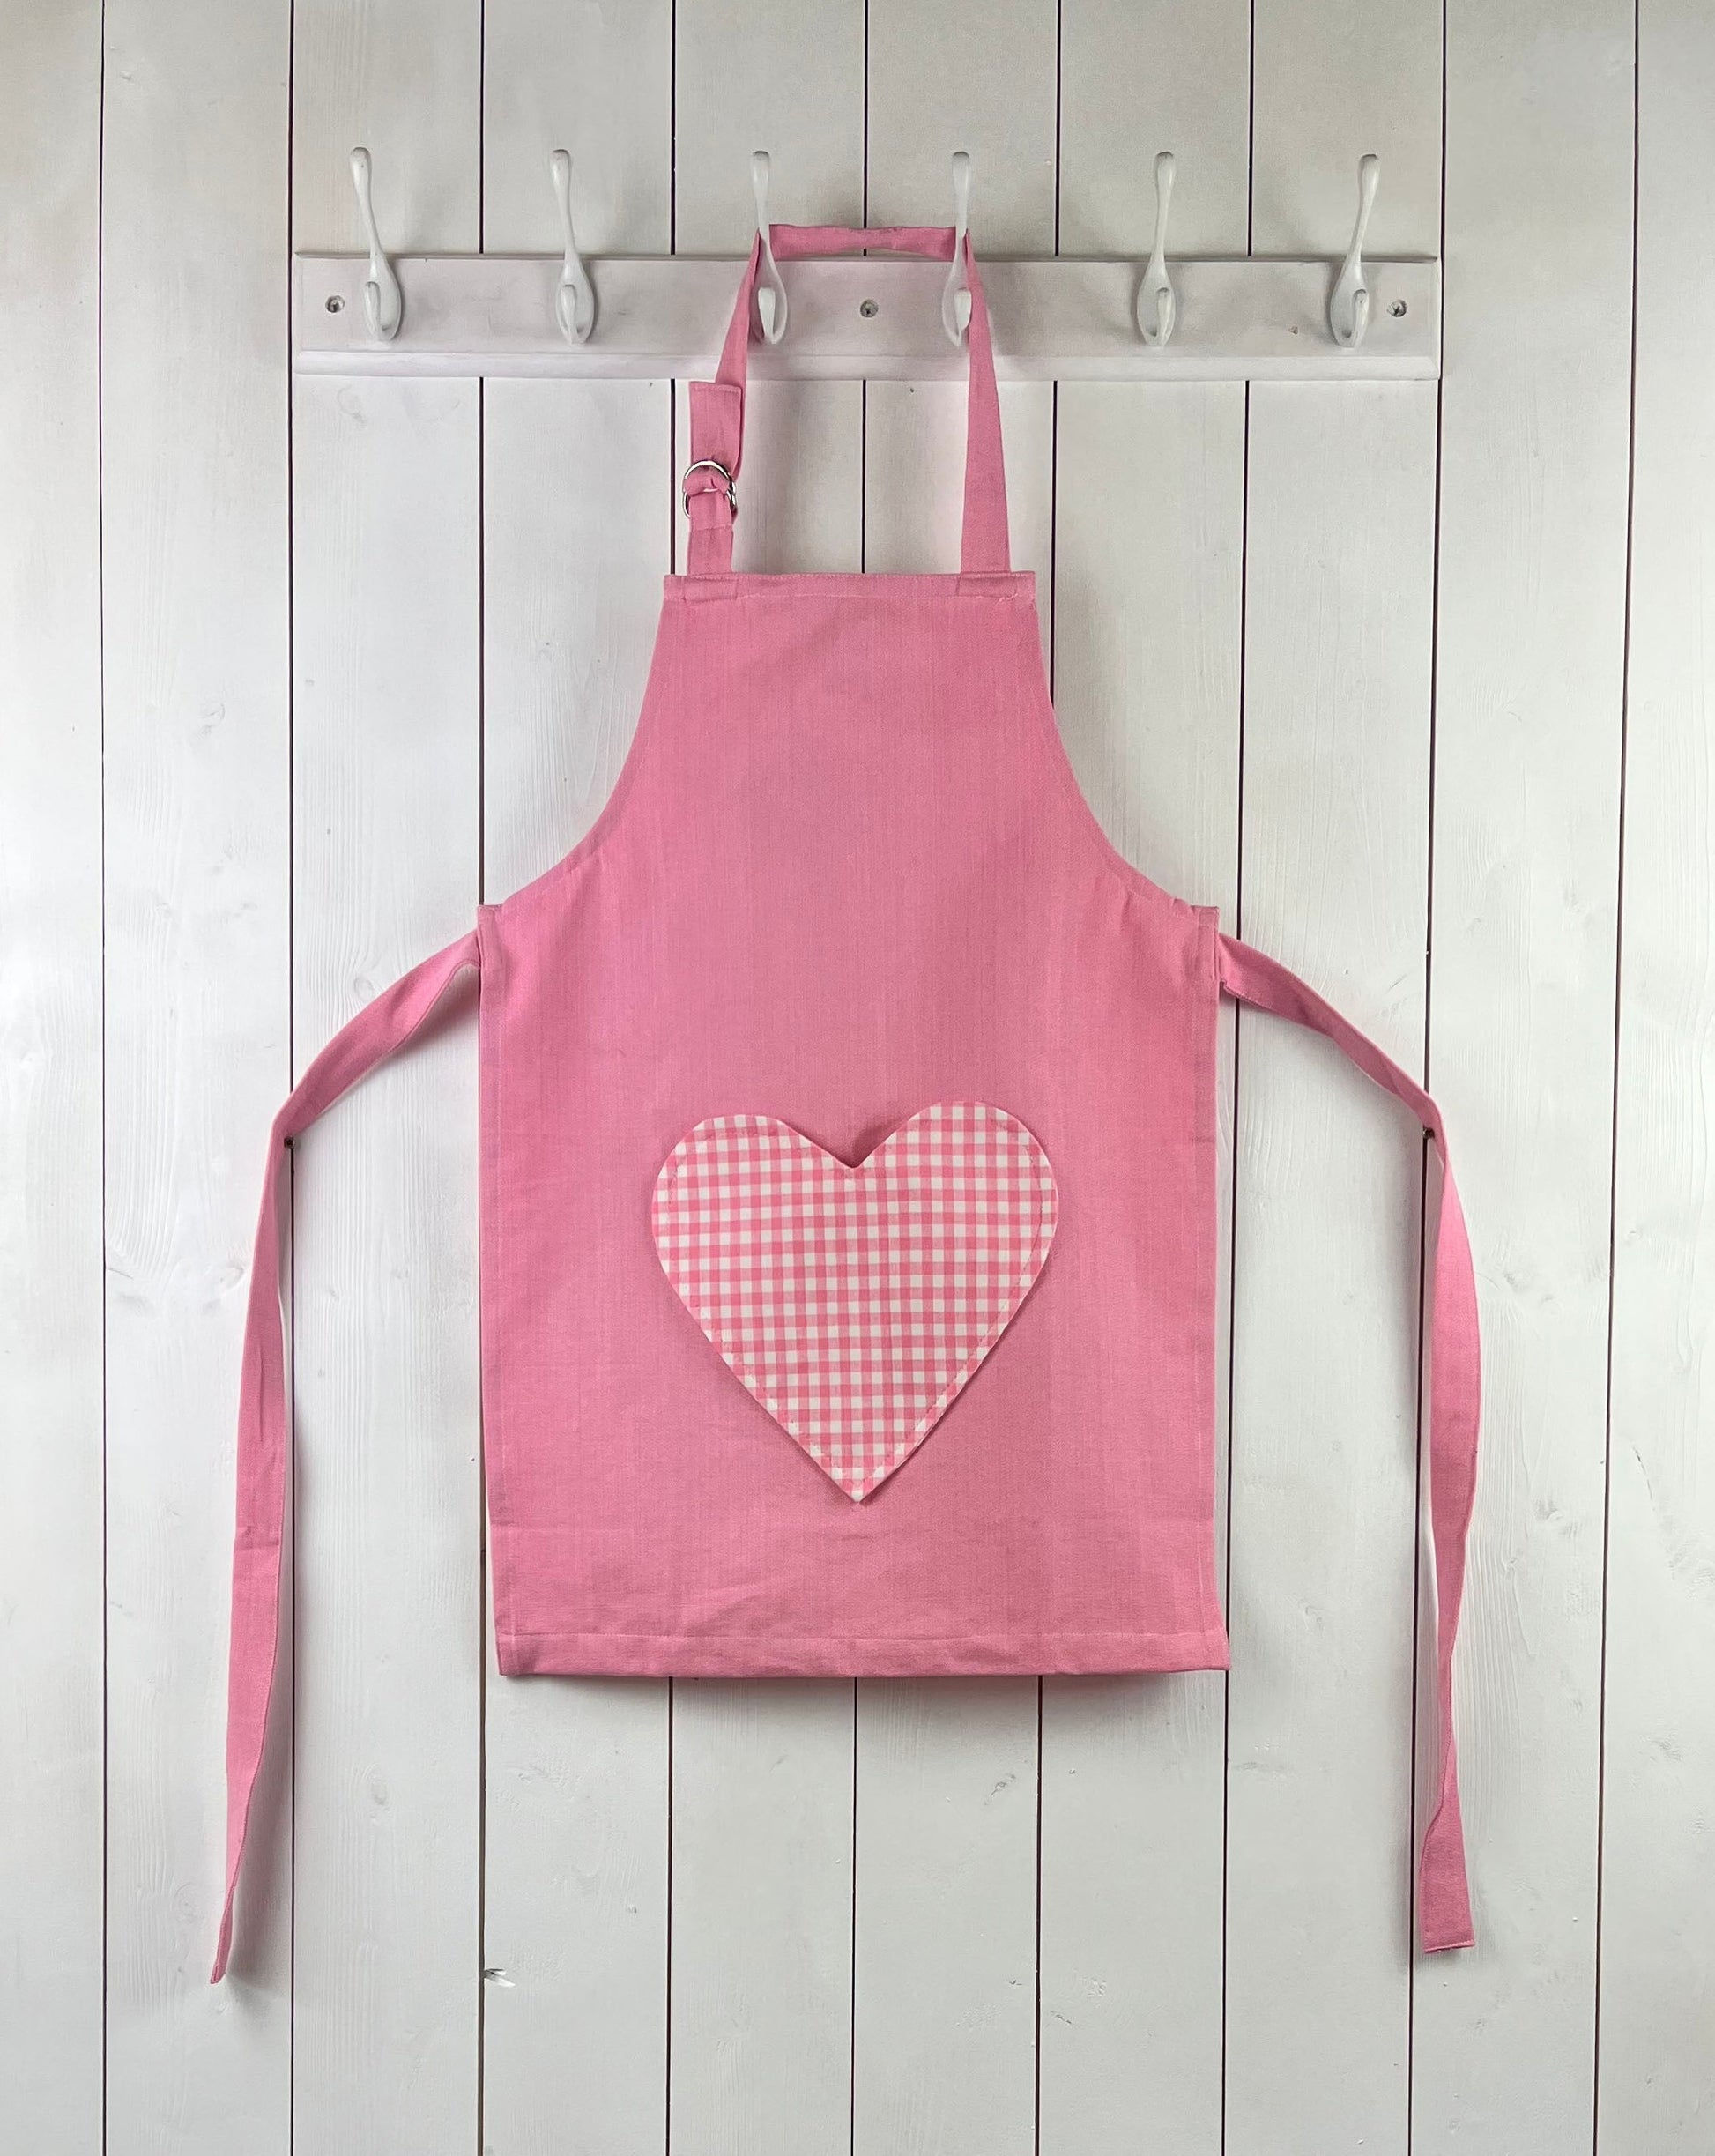 Pink child apron with gingham heart shaped pocket. From Sterck & Co.